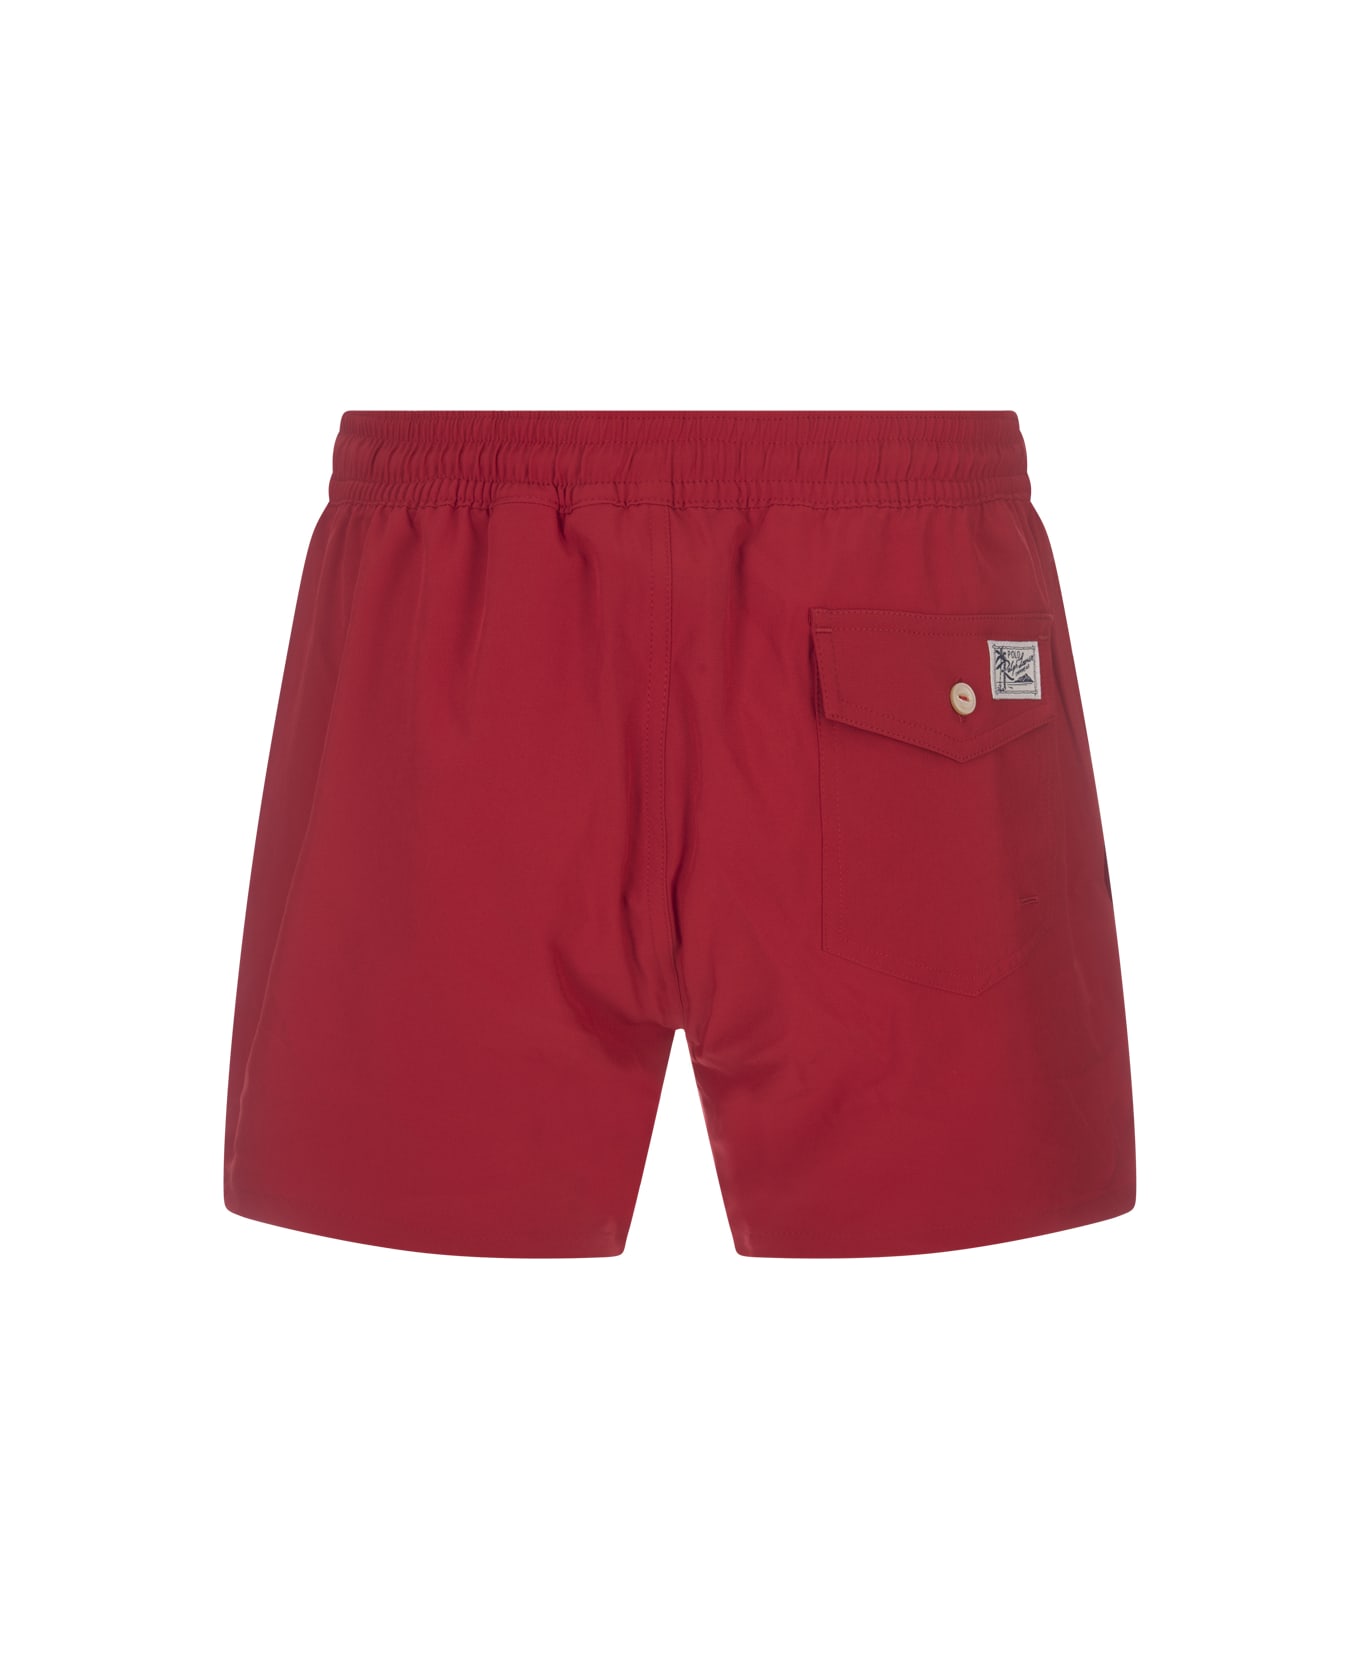 Ralph Lauren Red Swim Shorts With Embroidered Pony - Red